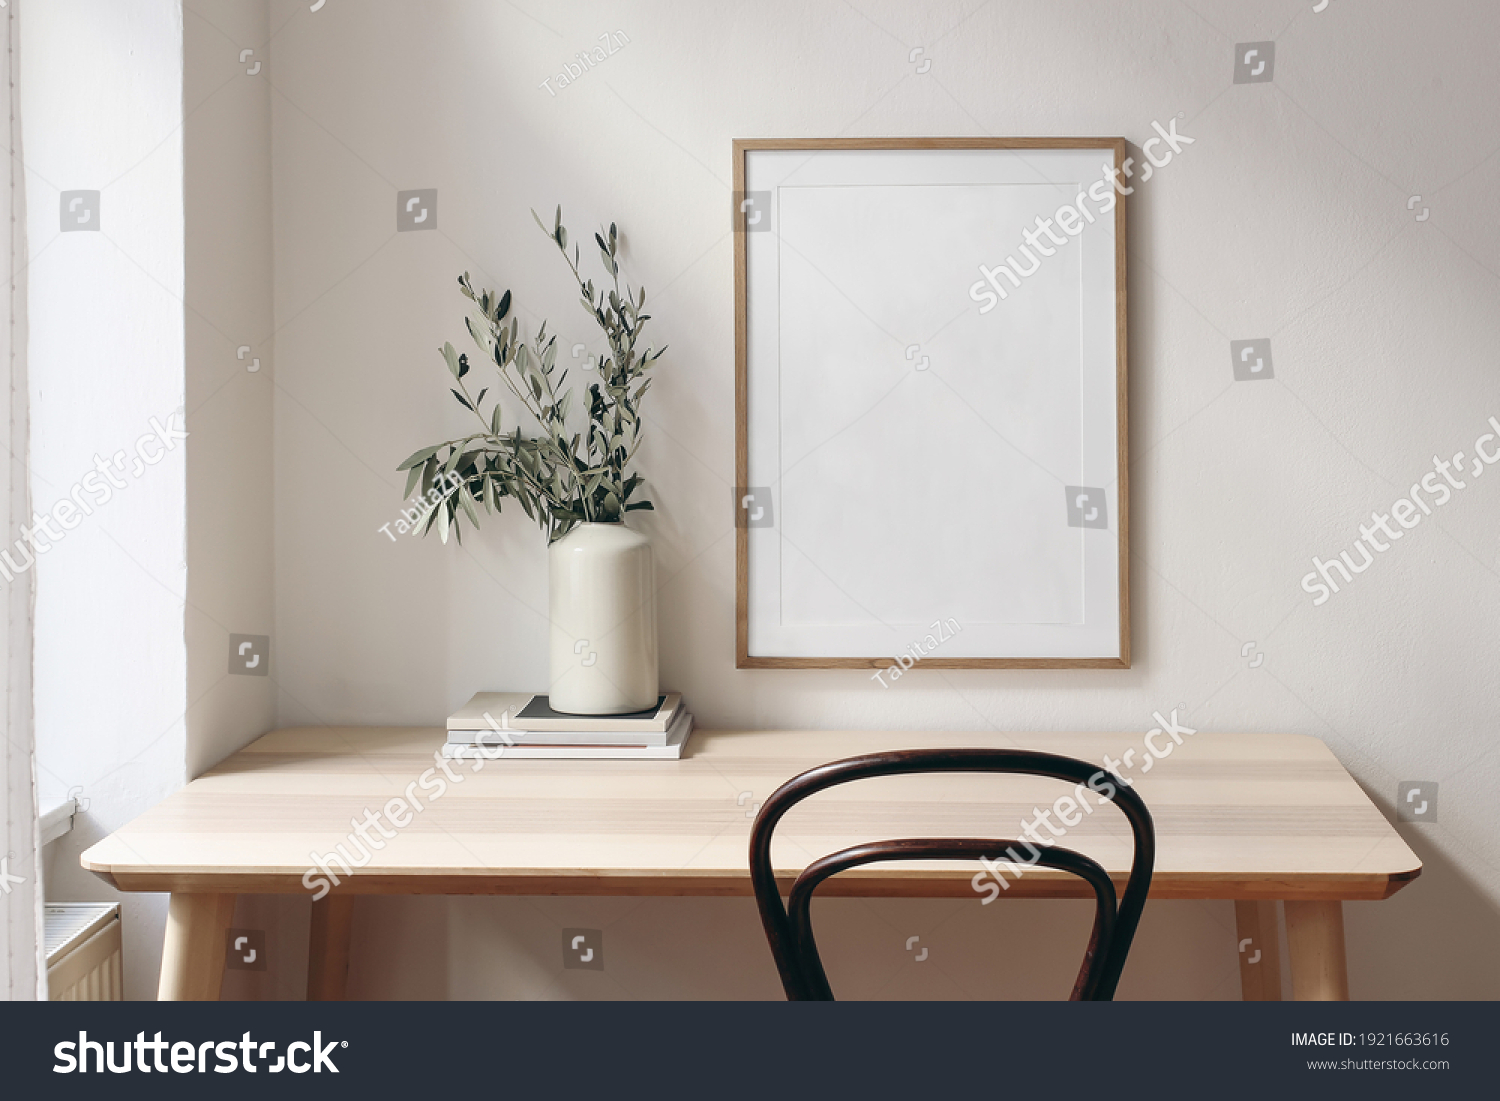 Home office concept. Old books, empty vertical wooden picture frame mockup hanging on white wall. Wooden desk, table. Vase with olive branches. Elegant working space. Scandinavian interior design. #1921663616